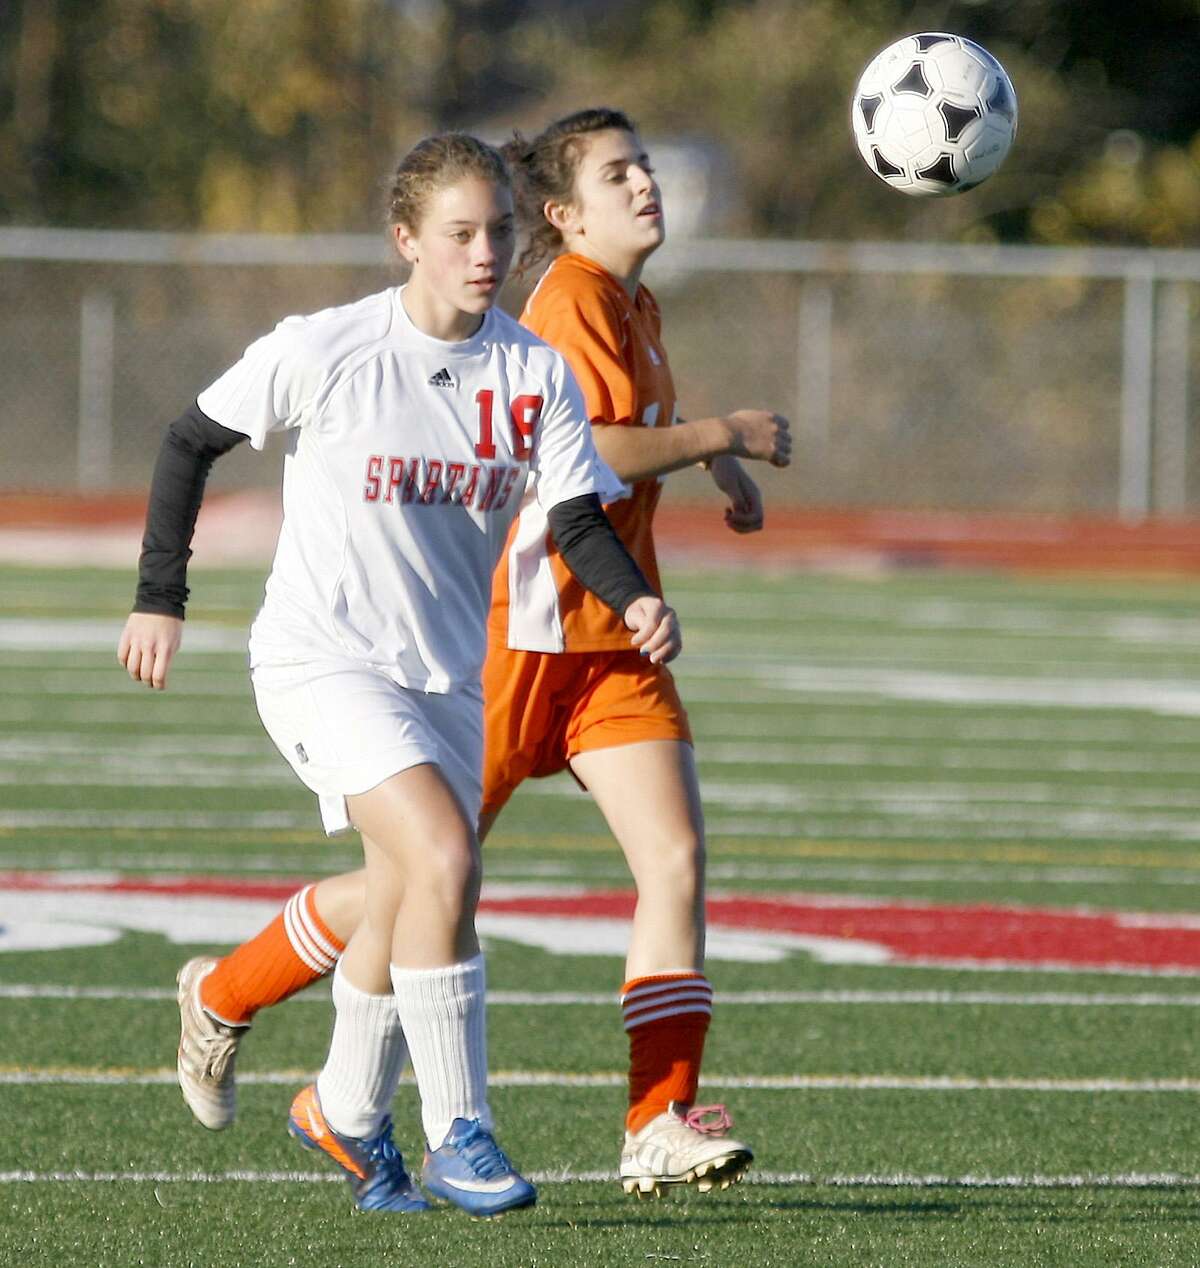 Dispatch Staff Photo by JOHN HAEGER twitter.com/oneidaphoto New Hartford's Alysa Keady (18) and Oneida's Nicole DelPino (14) chase down the loose ball in the first half of the Sec III quarterfinal match in New Hartford on Tuesday, Oct. 25, 2011.